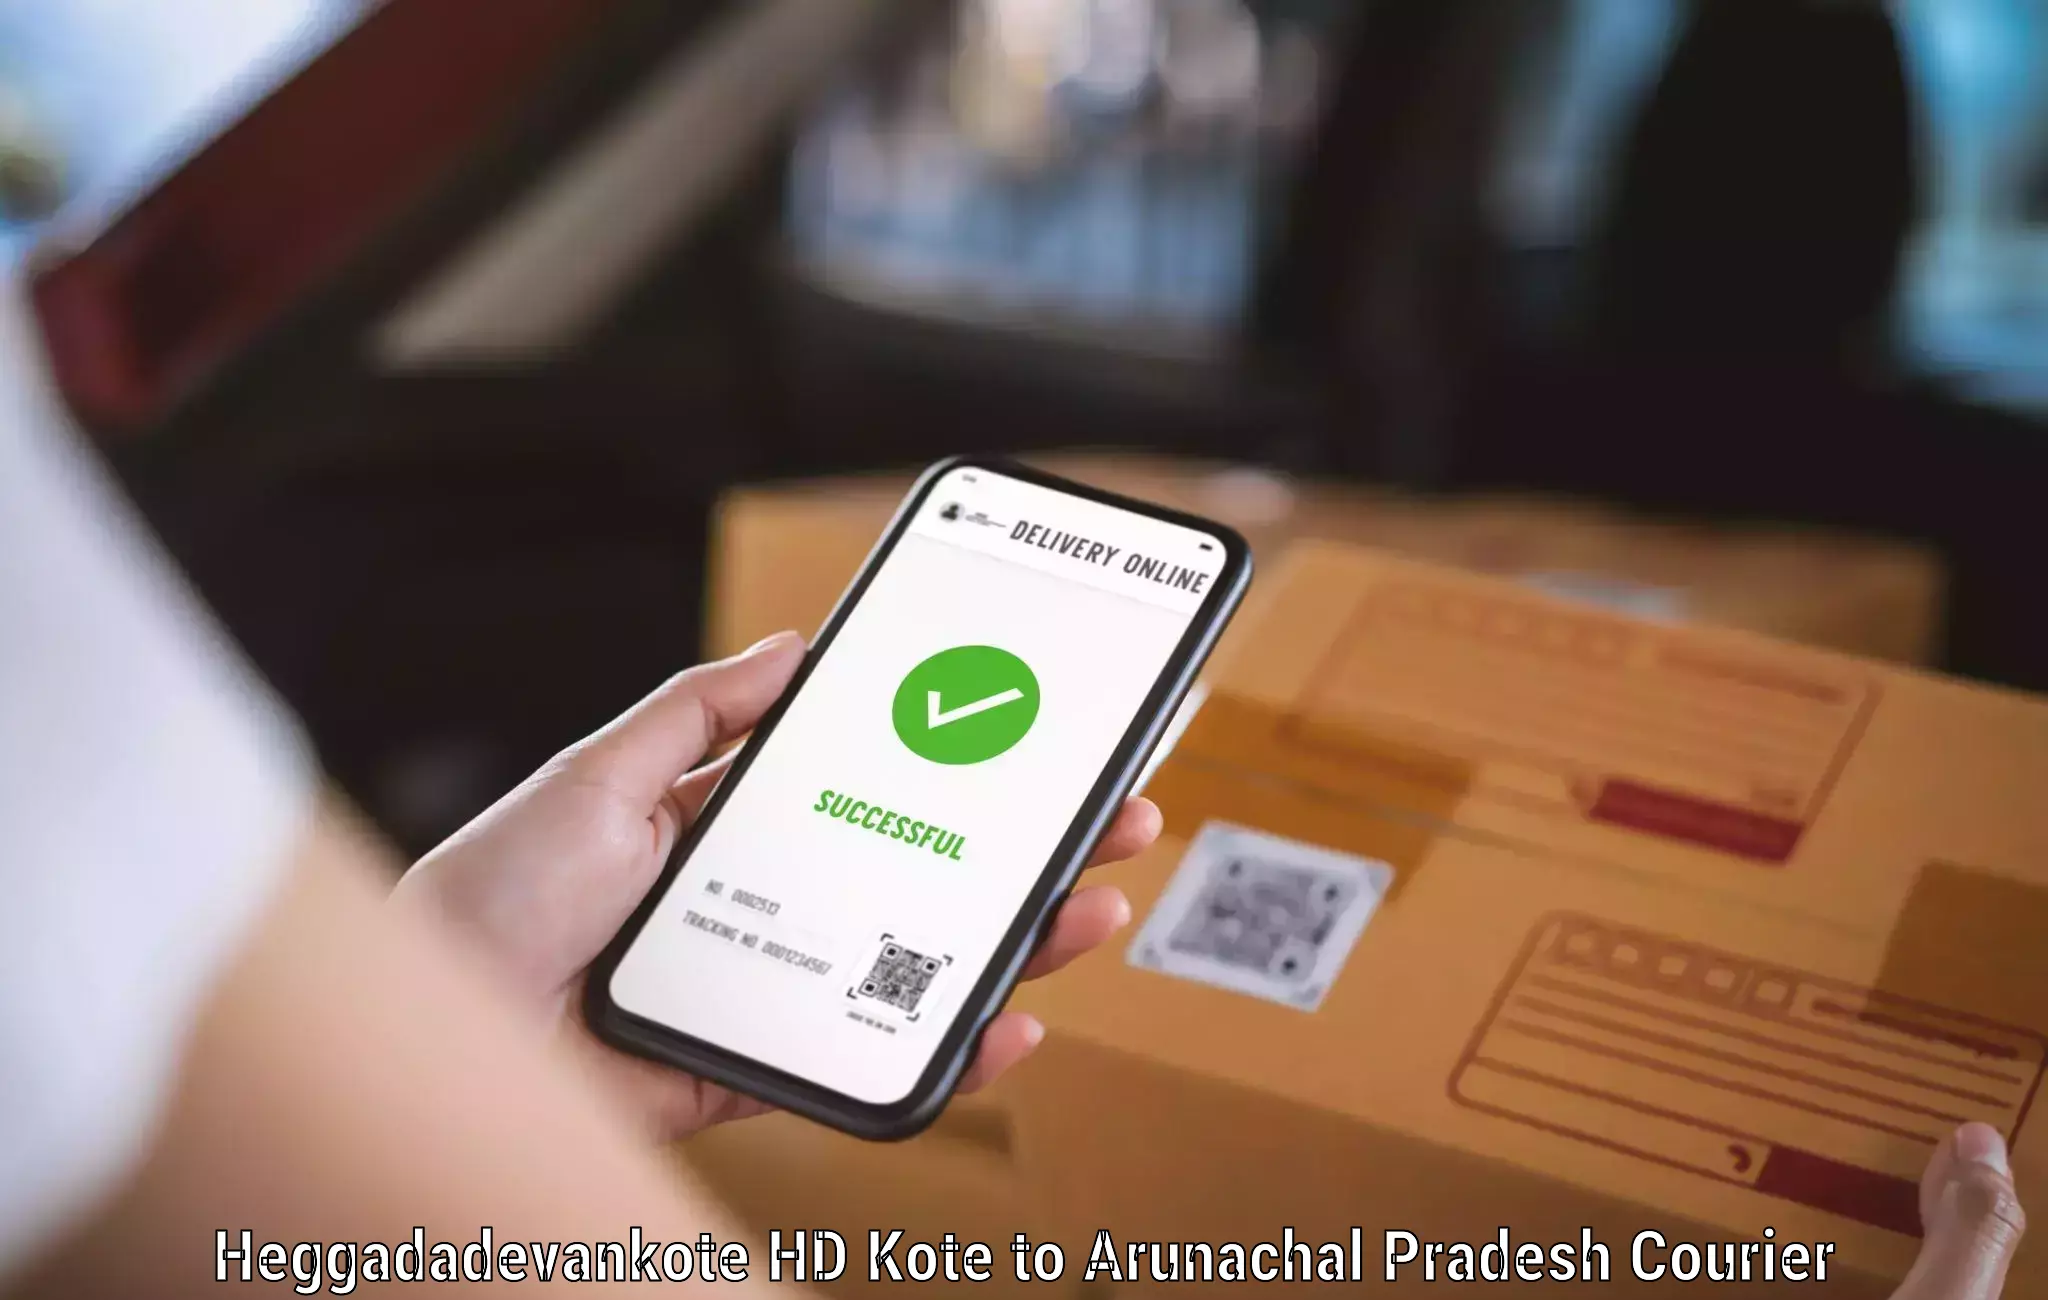 Expedited parcel delivery Heggadadevankote HD Kote to Boleng